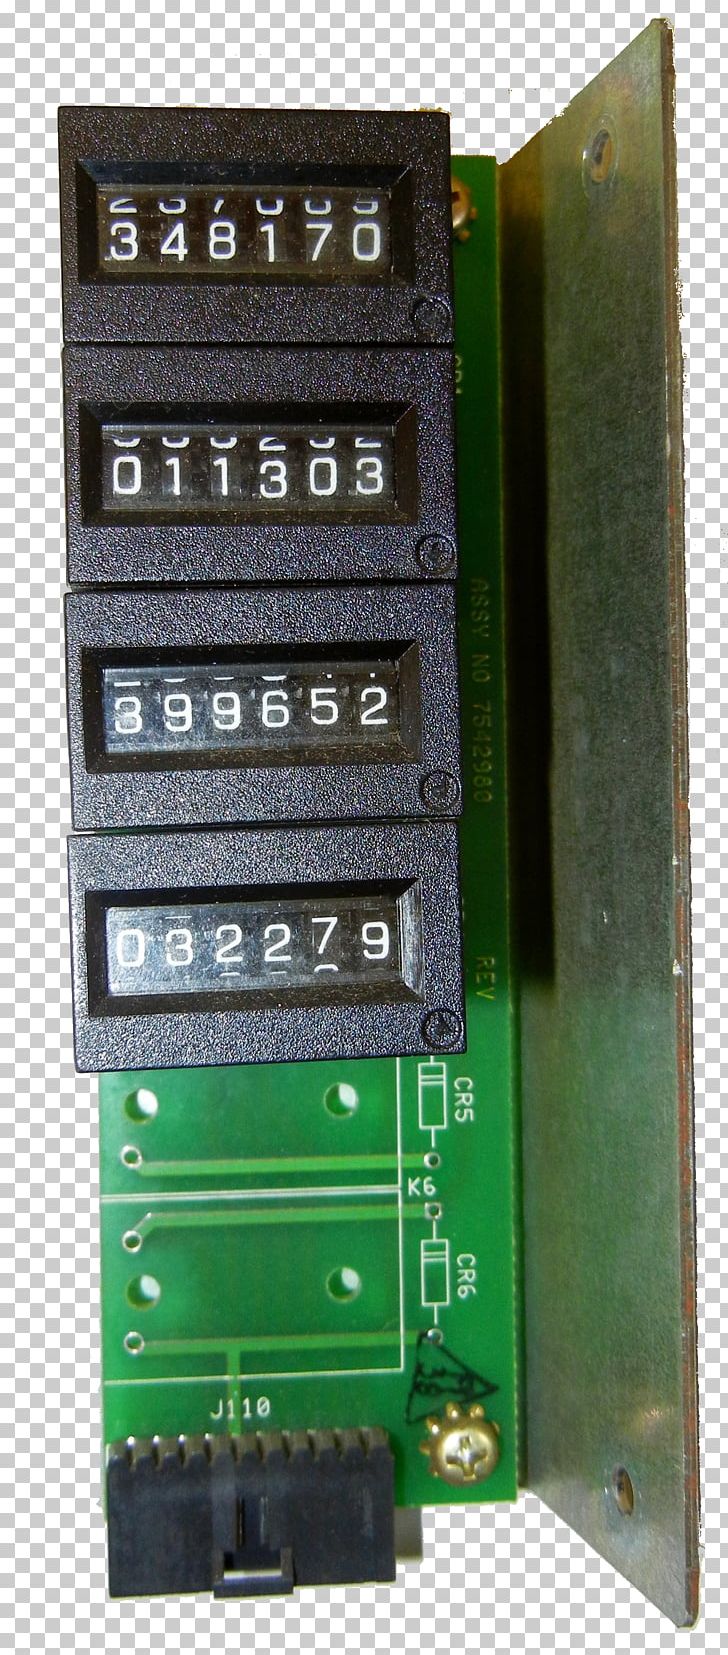 Circuit Breaker Hardware Programmer Microcontroller Electronics PNG, Clipart, Circuit Breaker, Circuit Component, Computer Hardware, Electrical Network, Electronic Component Free PNG Download